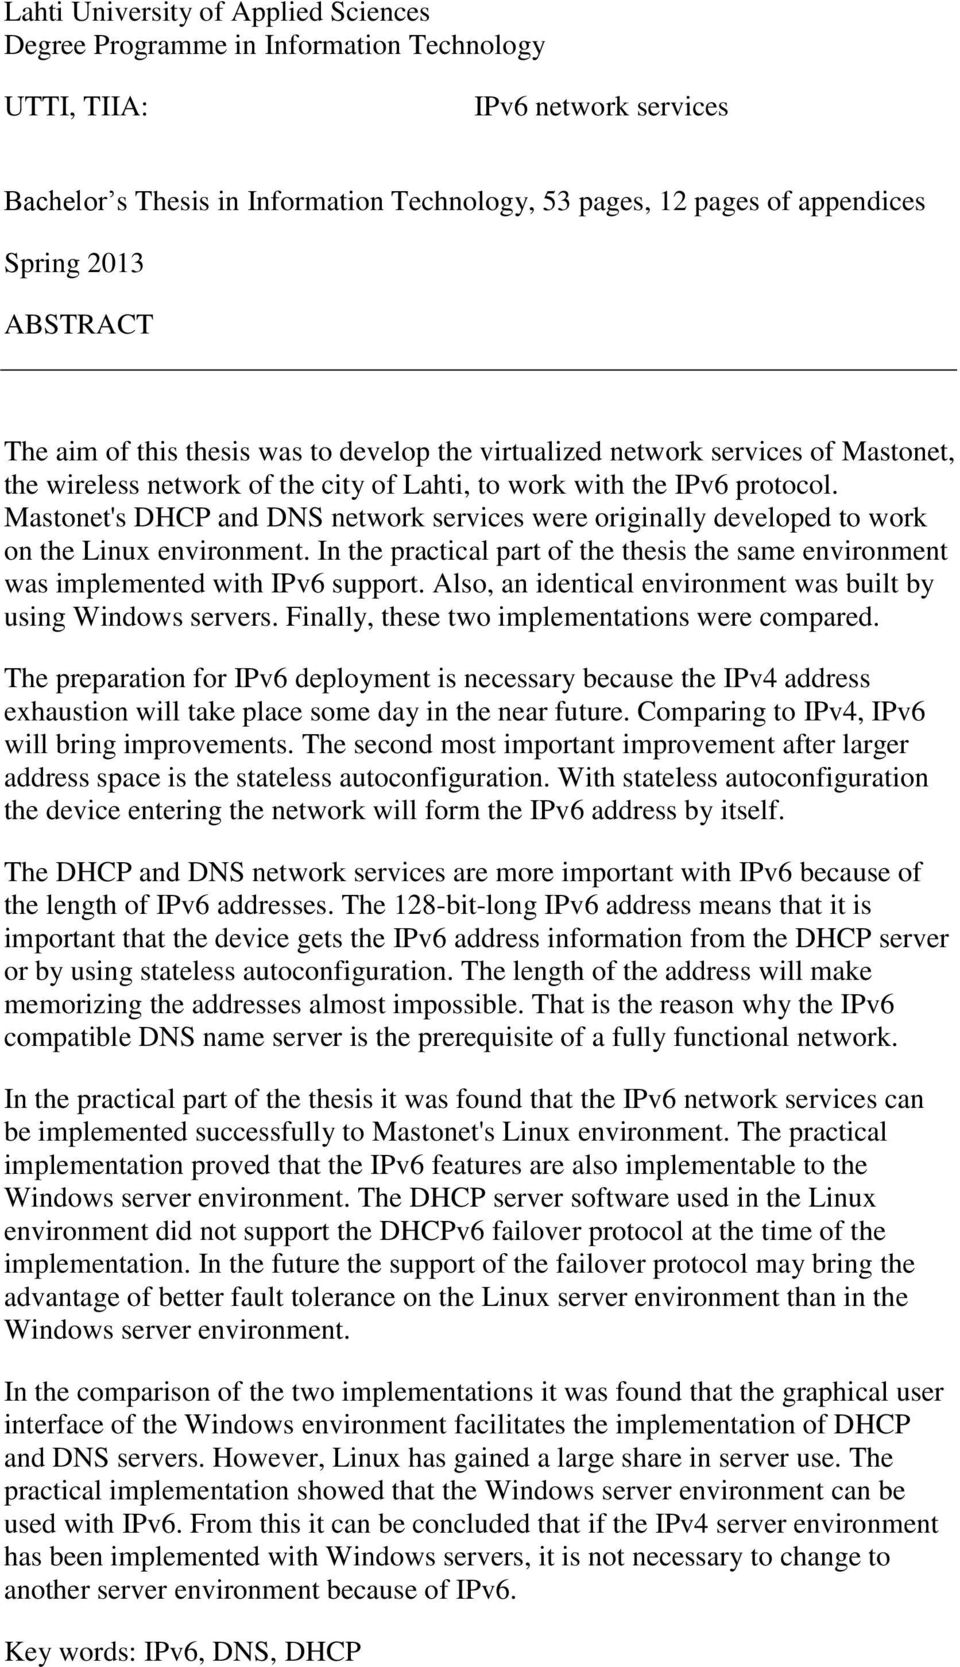 Mastonet's DHCP and DNS network services were originally developed to work on the Linux environment. In the practical part of the thesis the same environment was implemented with IPv6 support.